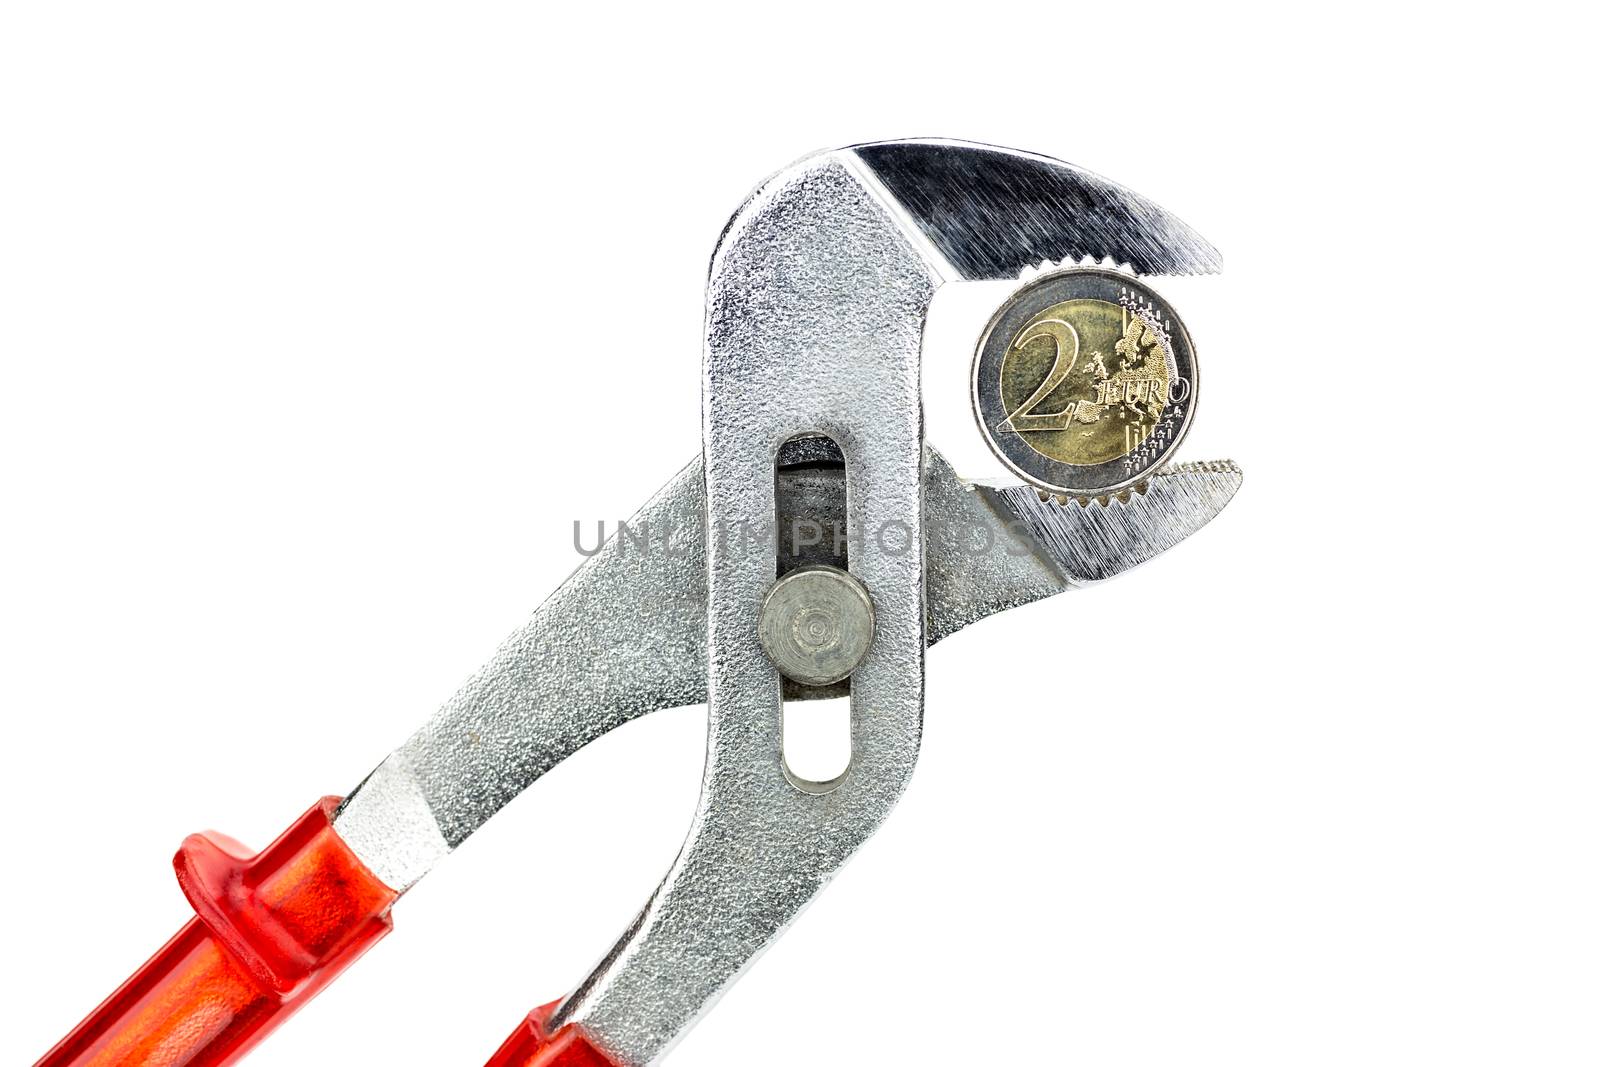 Water pump pliers holding two euro coin on white background by BenSchonewille